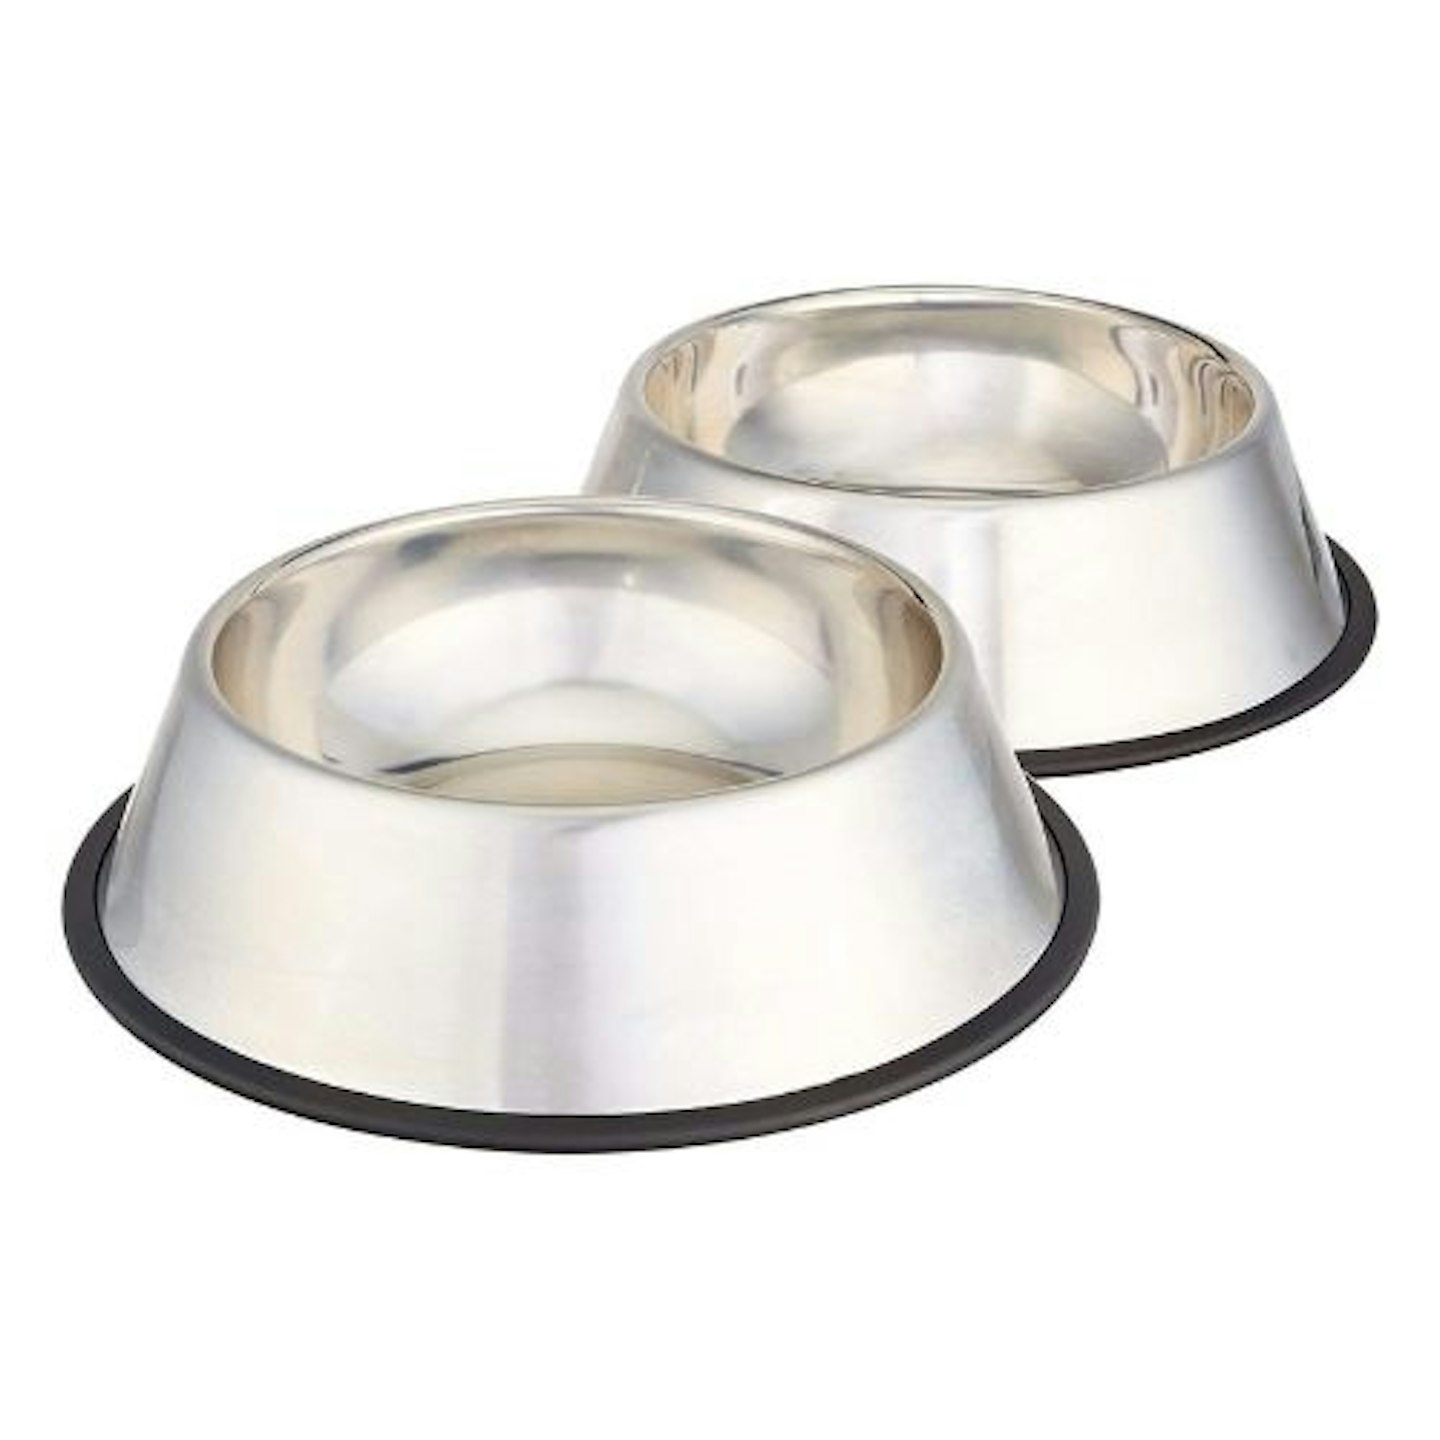 Amazon Basics Pet Bowls to Feed Dogs, Stainless Steel